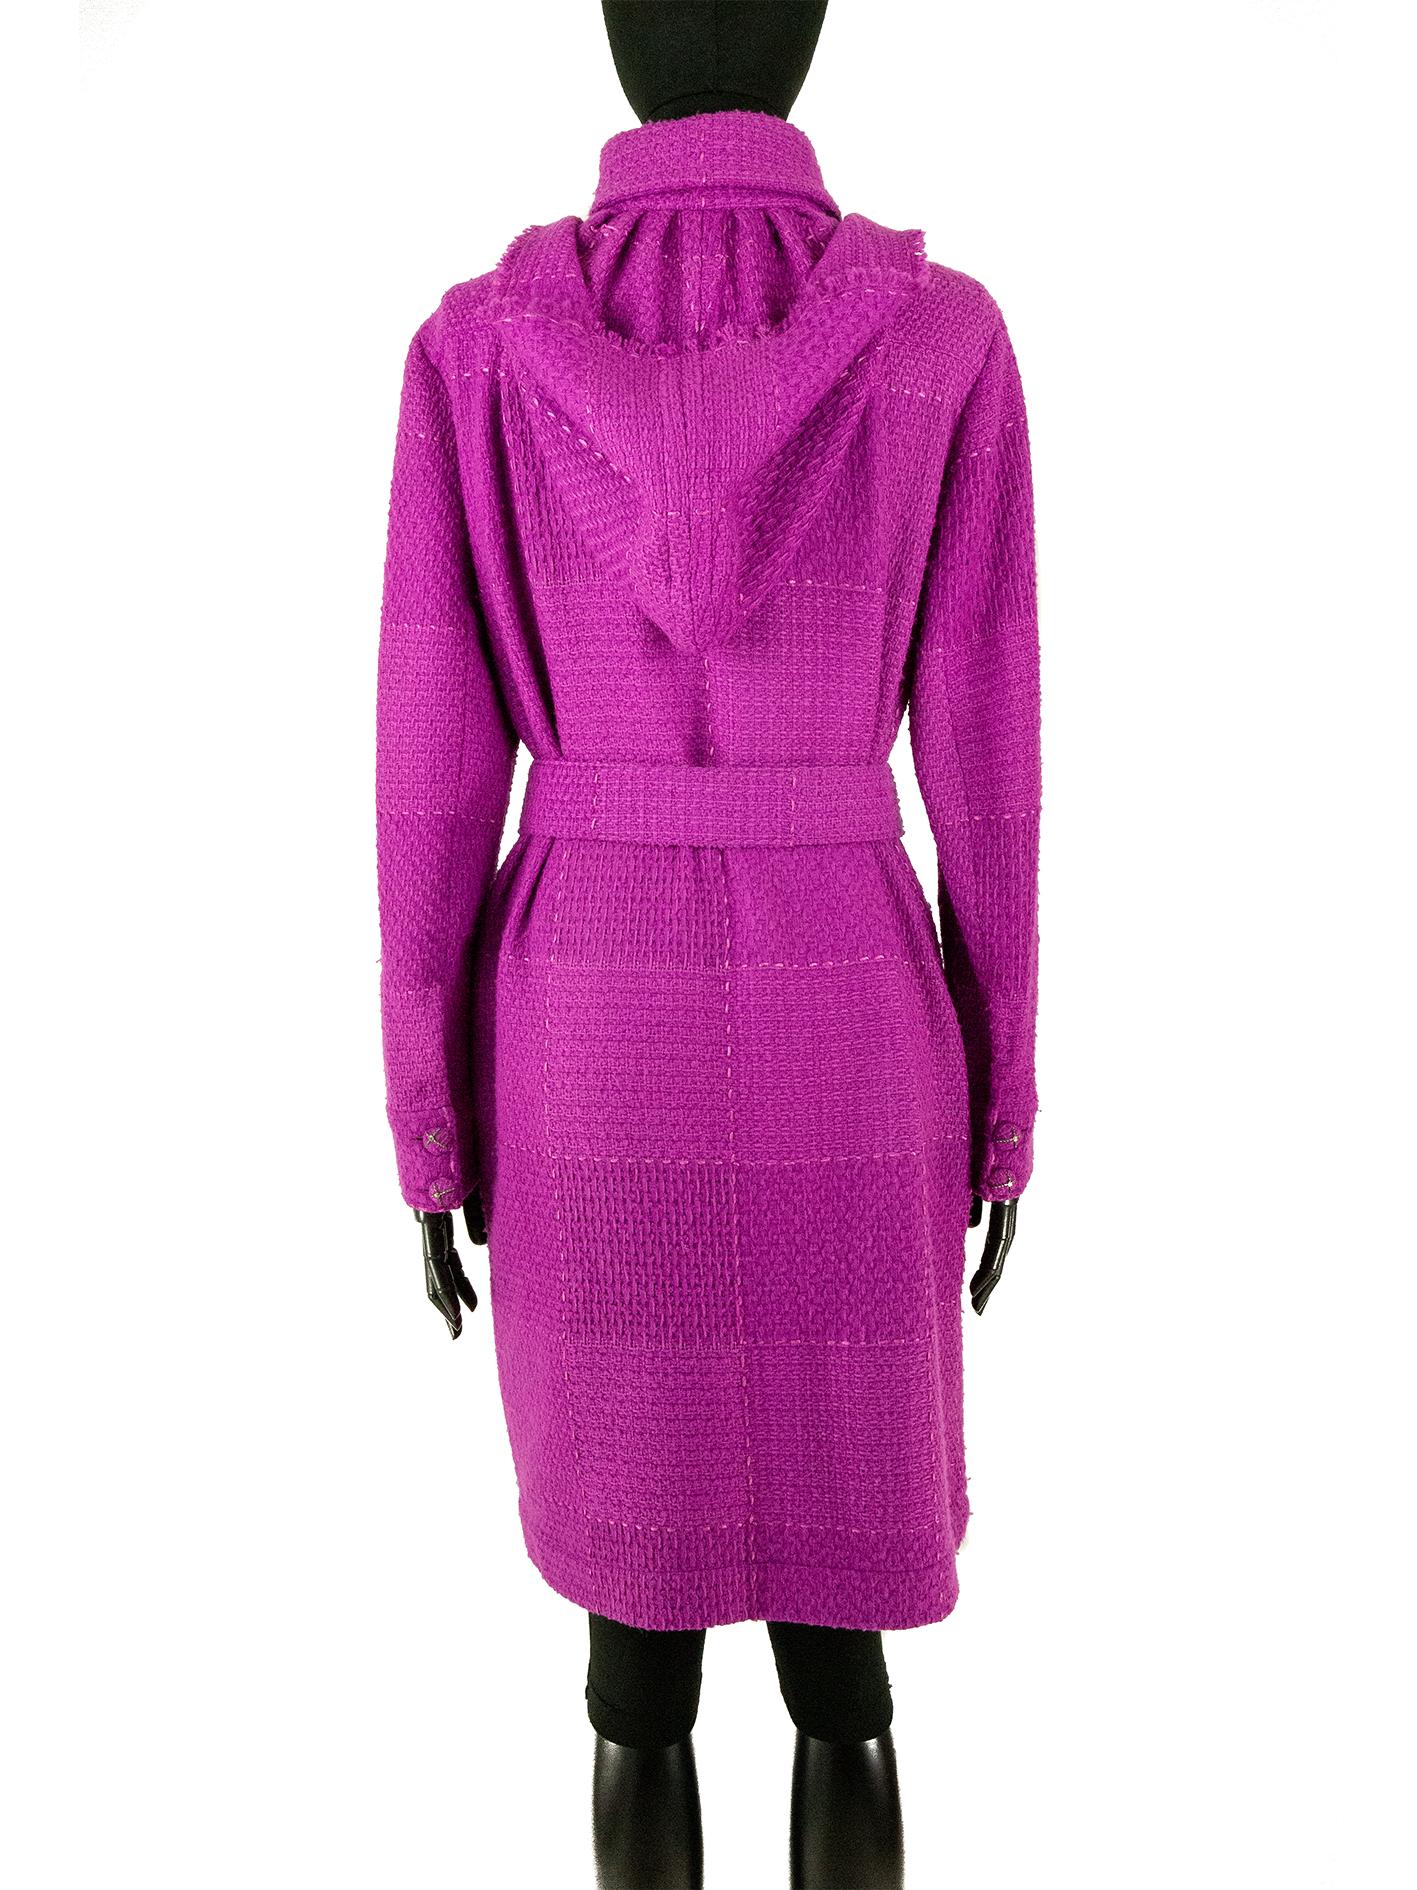 This Chanel tweed coat, hailing from the Autumn 2007 collection, is in a magenta pink with decorative stitching. The back features a hood attached to the standard collar. The silhouette is narrow and straight but can be made fitted with the